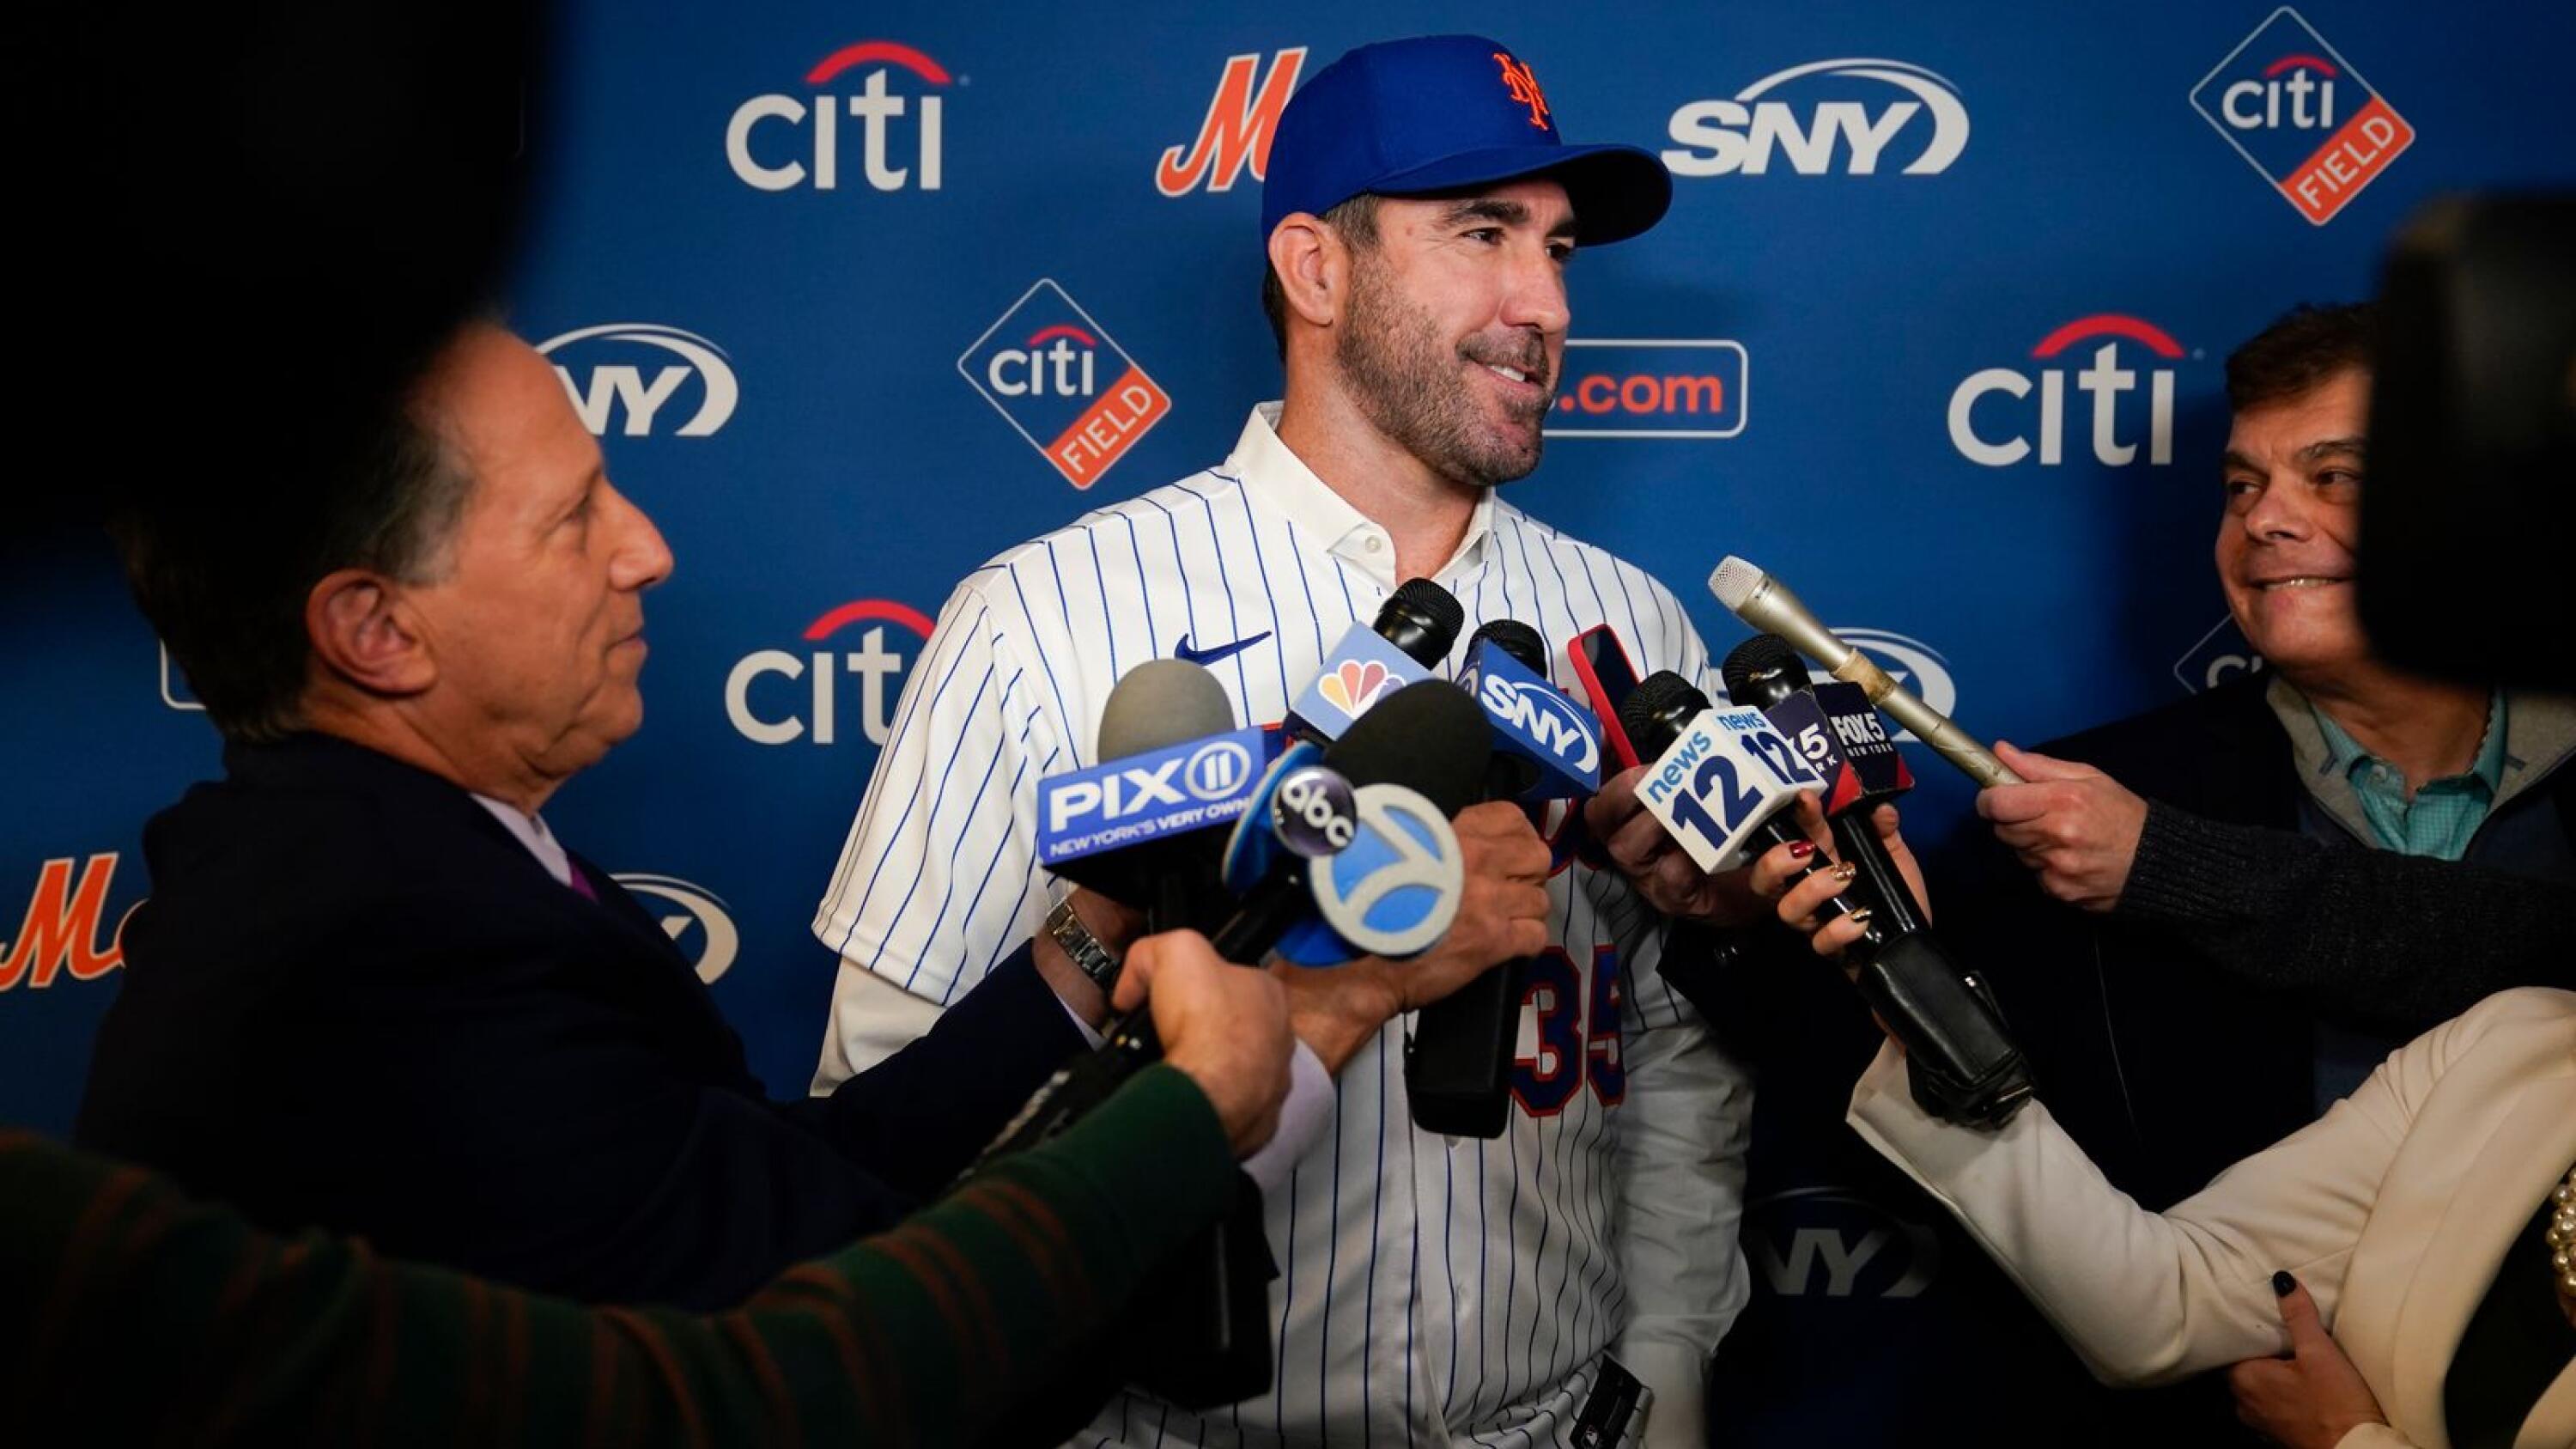 Here's why player development matters so much to Mets owner Steve